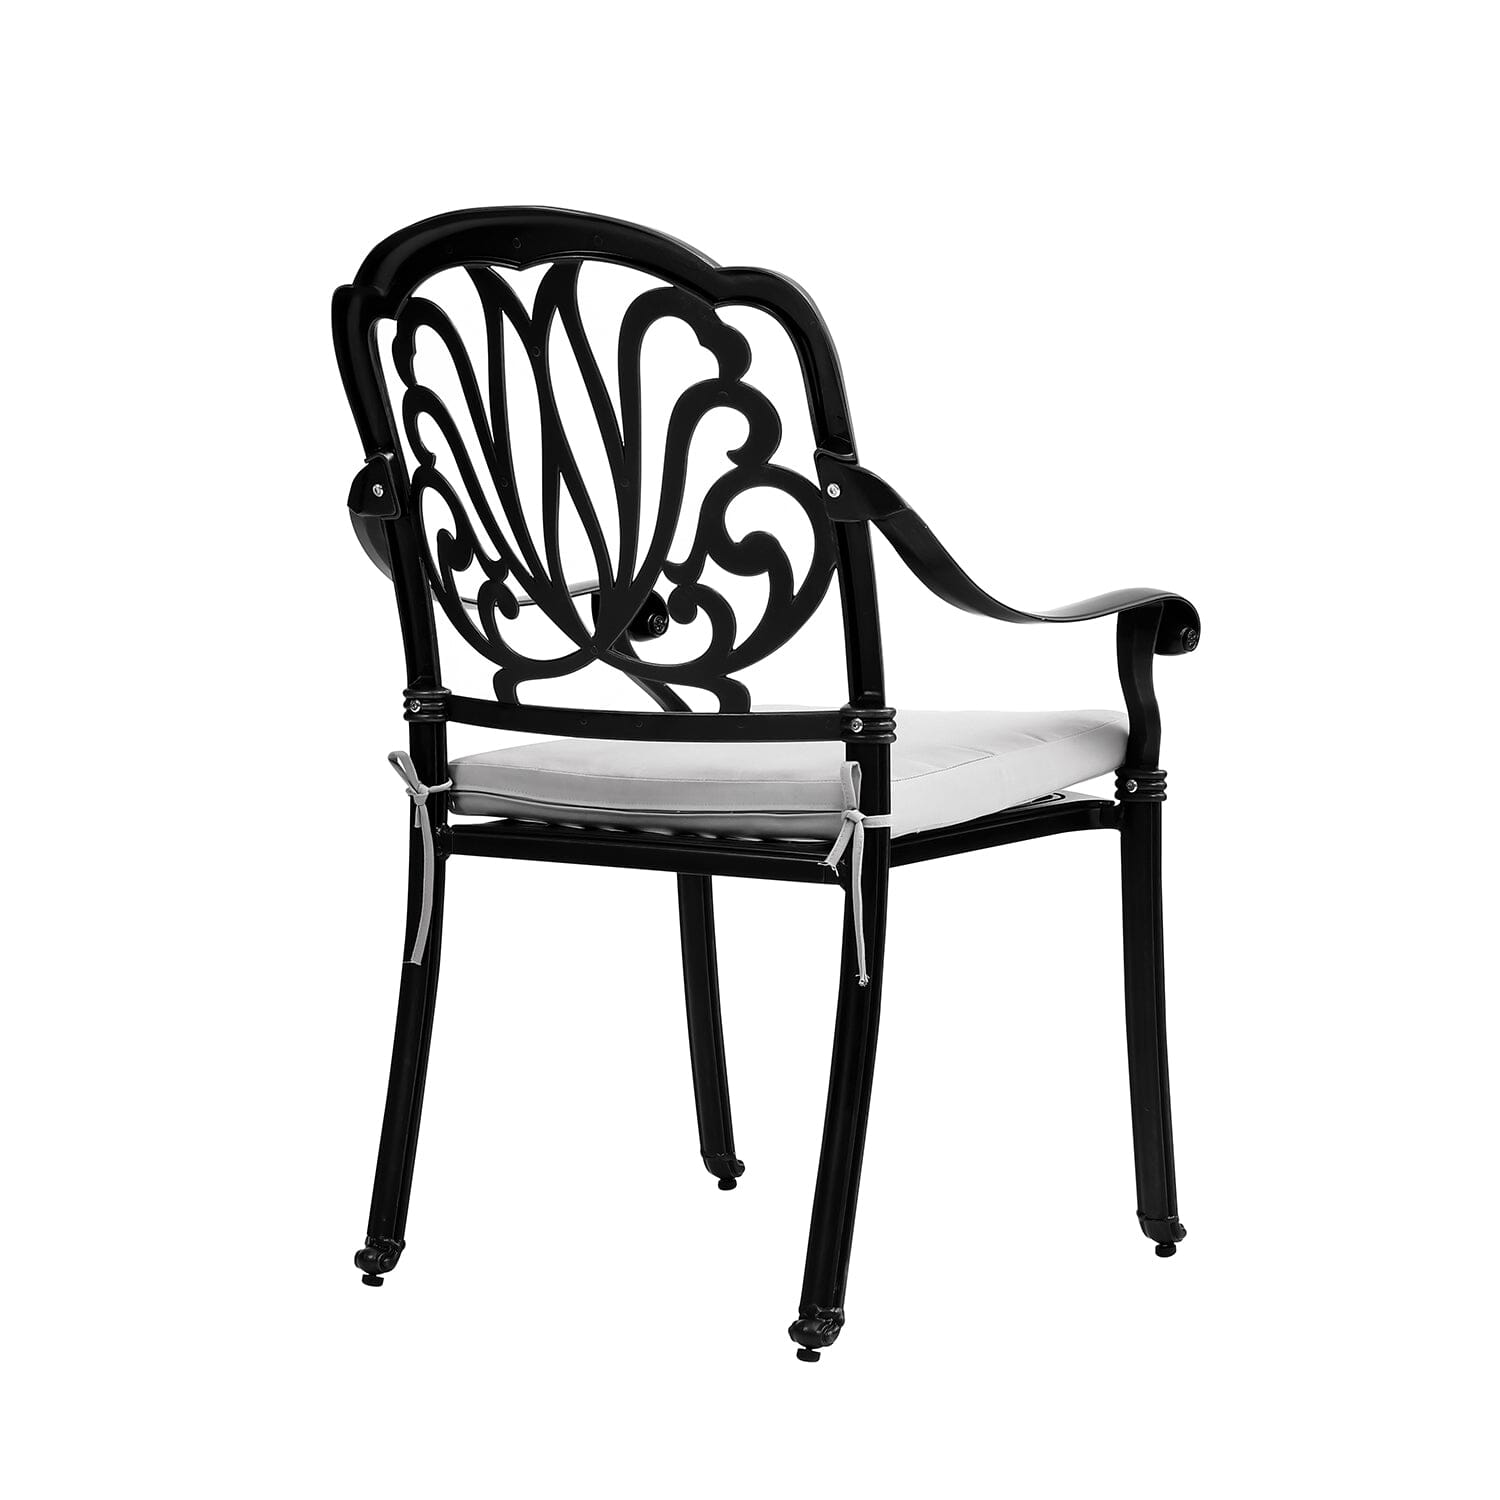 Set of 2 Outdoor Cast Aluminum Dining Chairs with Cushions Garden Seating Living and Home 